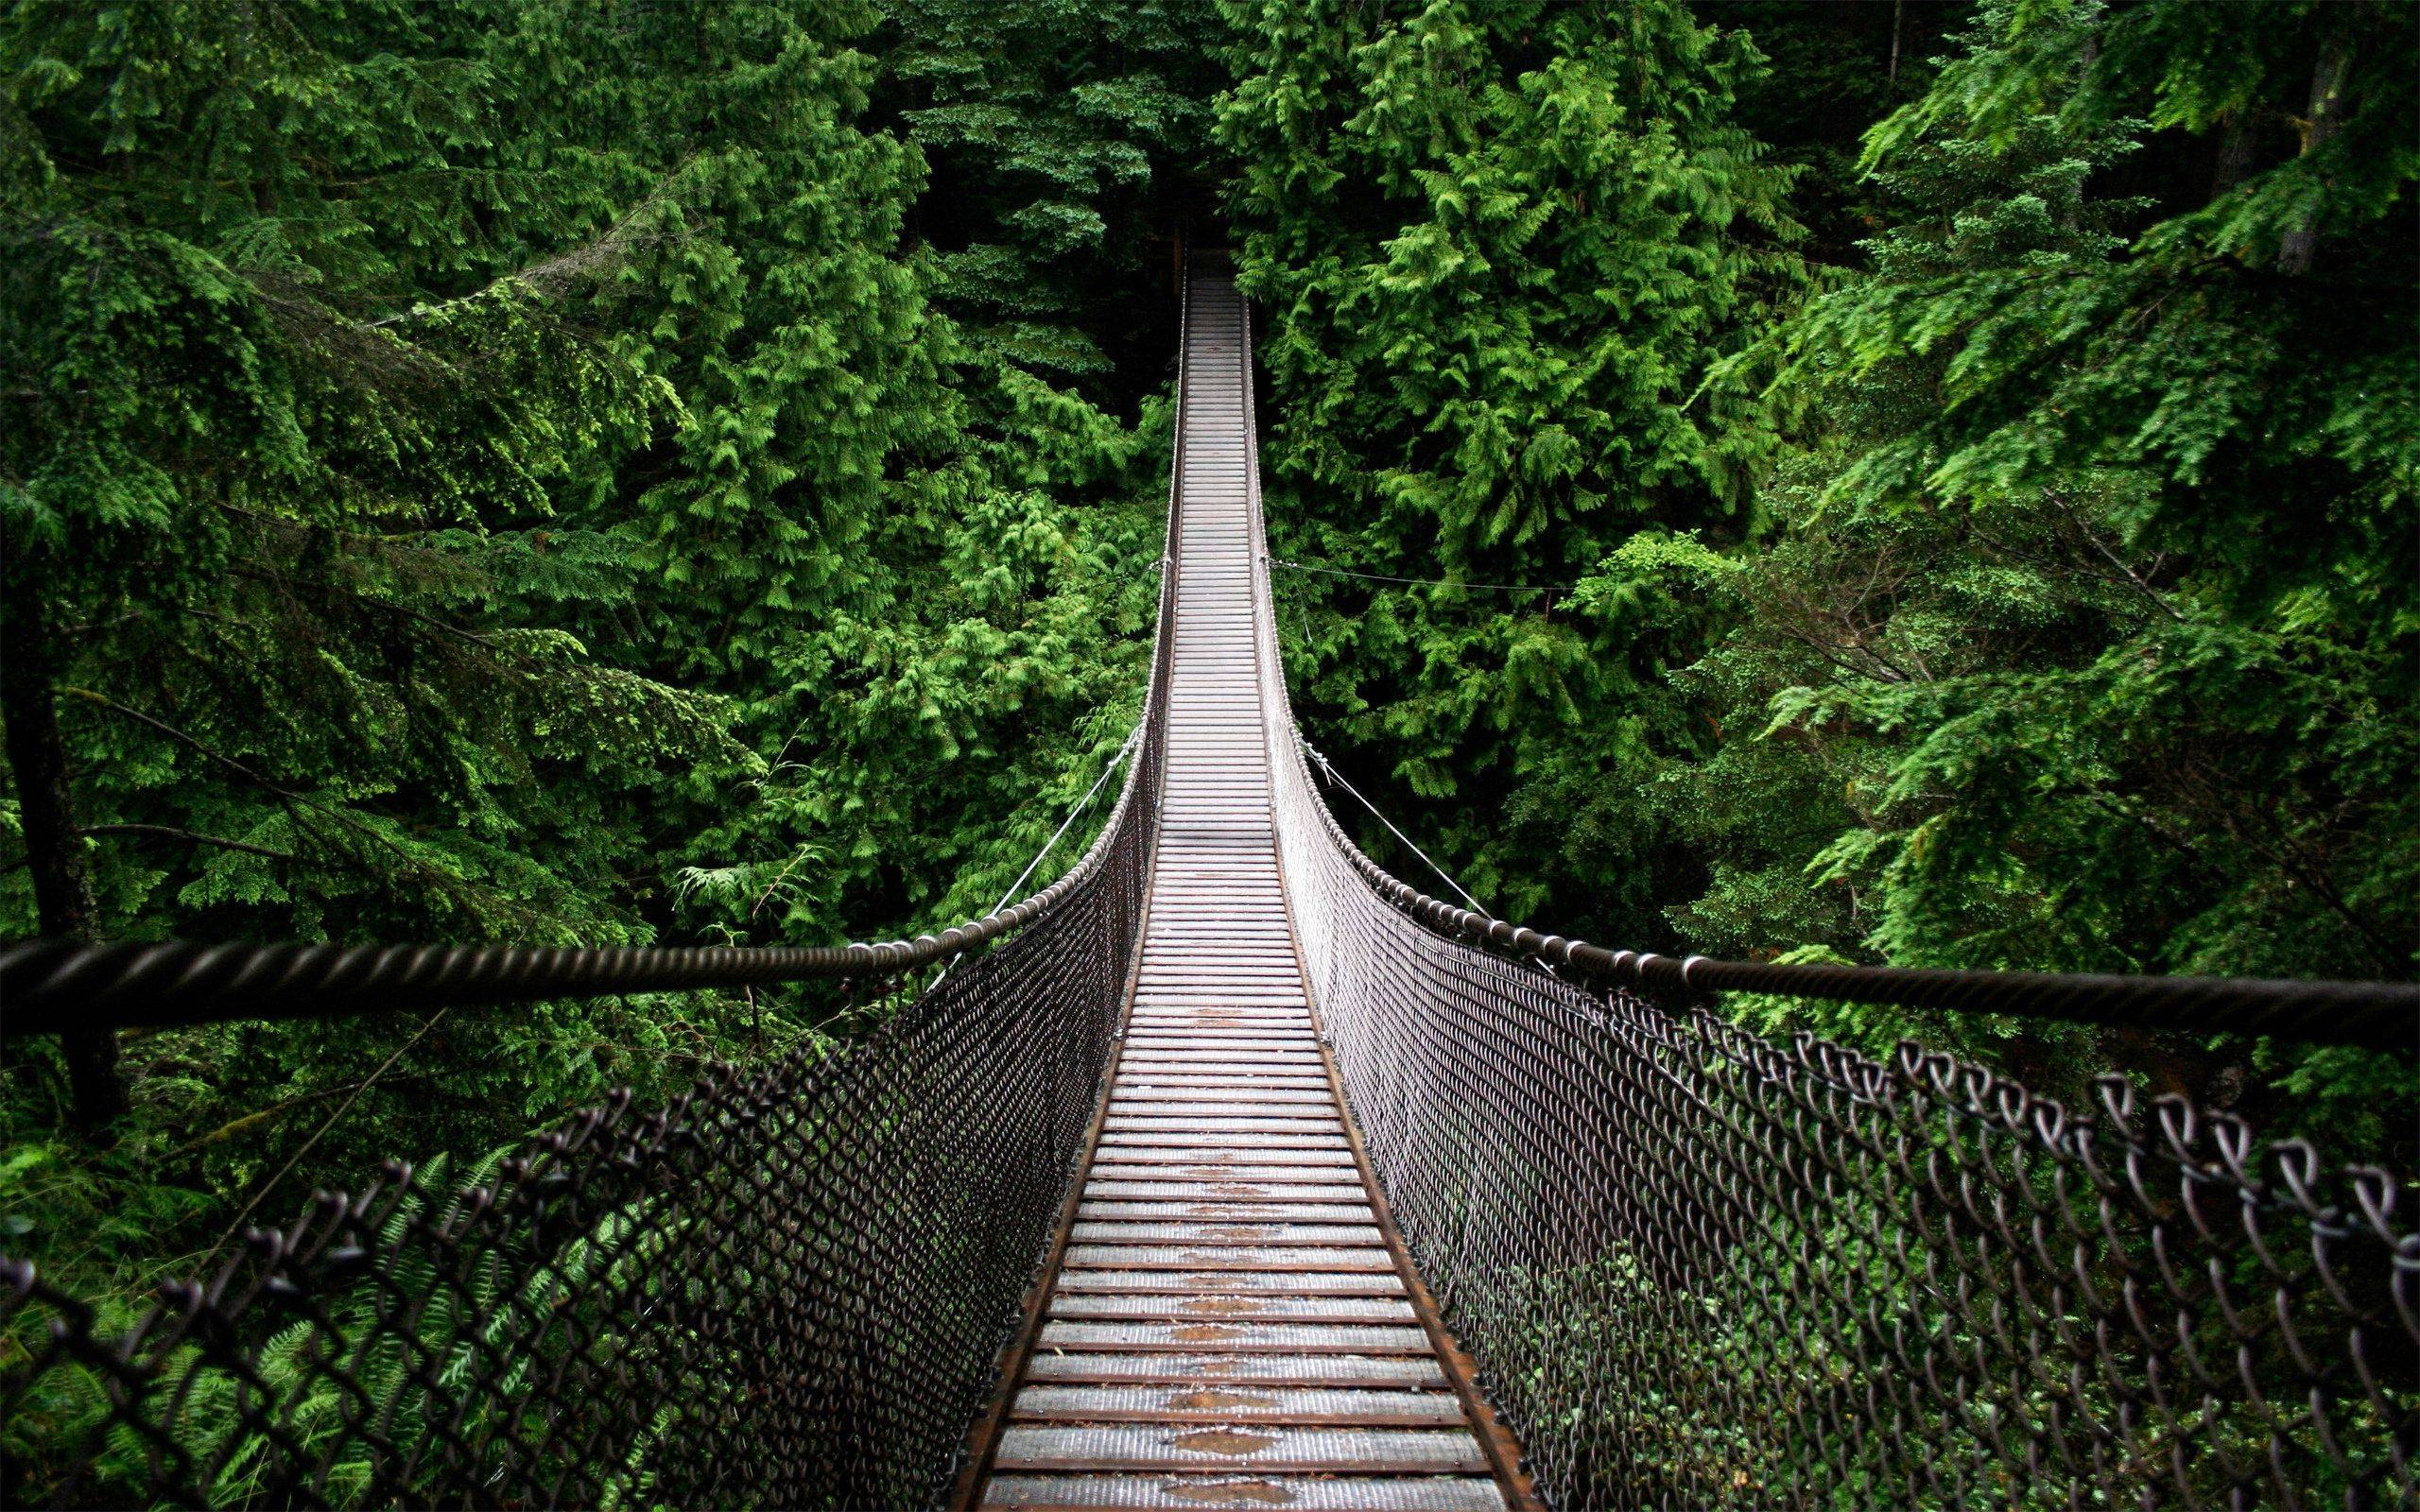 Hanged Bridge in the Jungle Wallpapers and Stock Photo